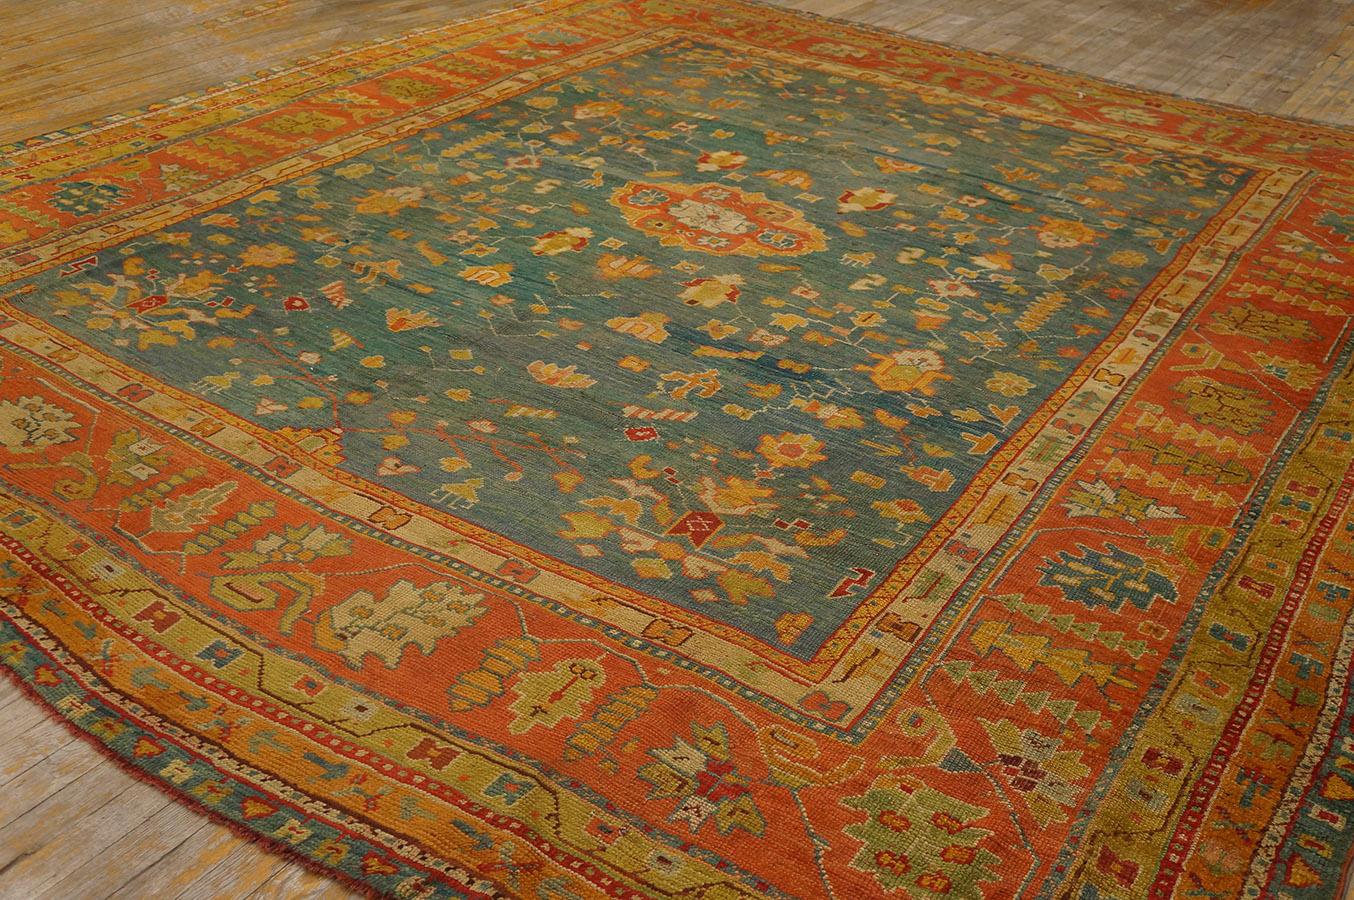 Hand-Knotted 19th Century Turkish Oushak Carpet ( 10'5'' x 11'10'' - 317 x 360 cm )  For Sale